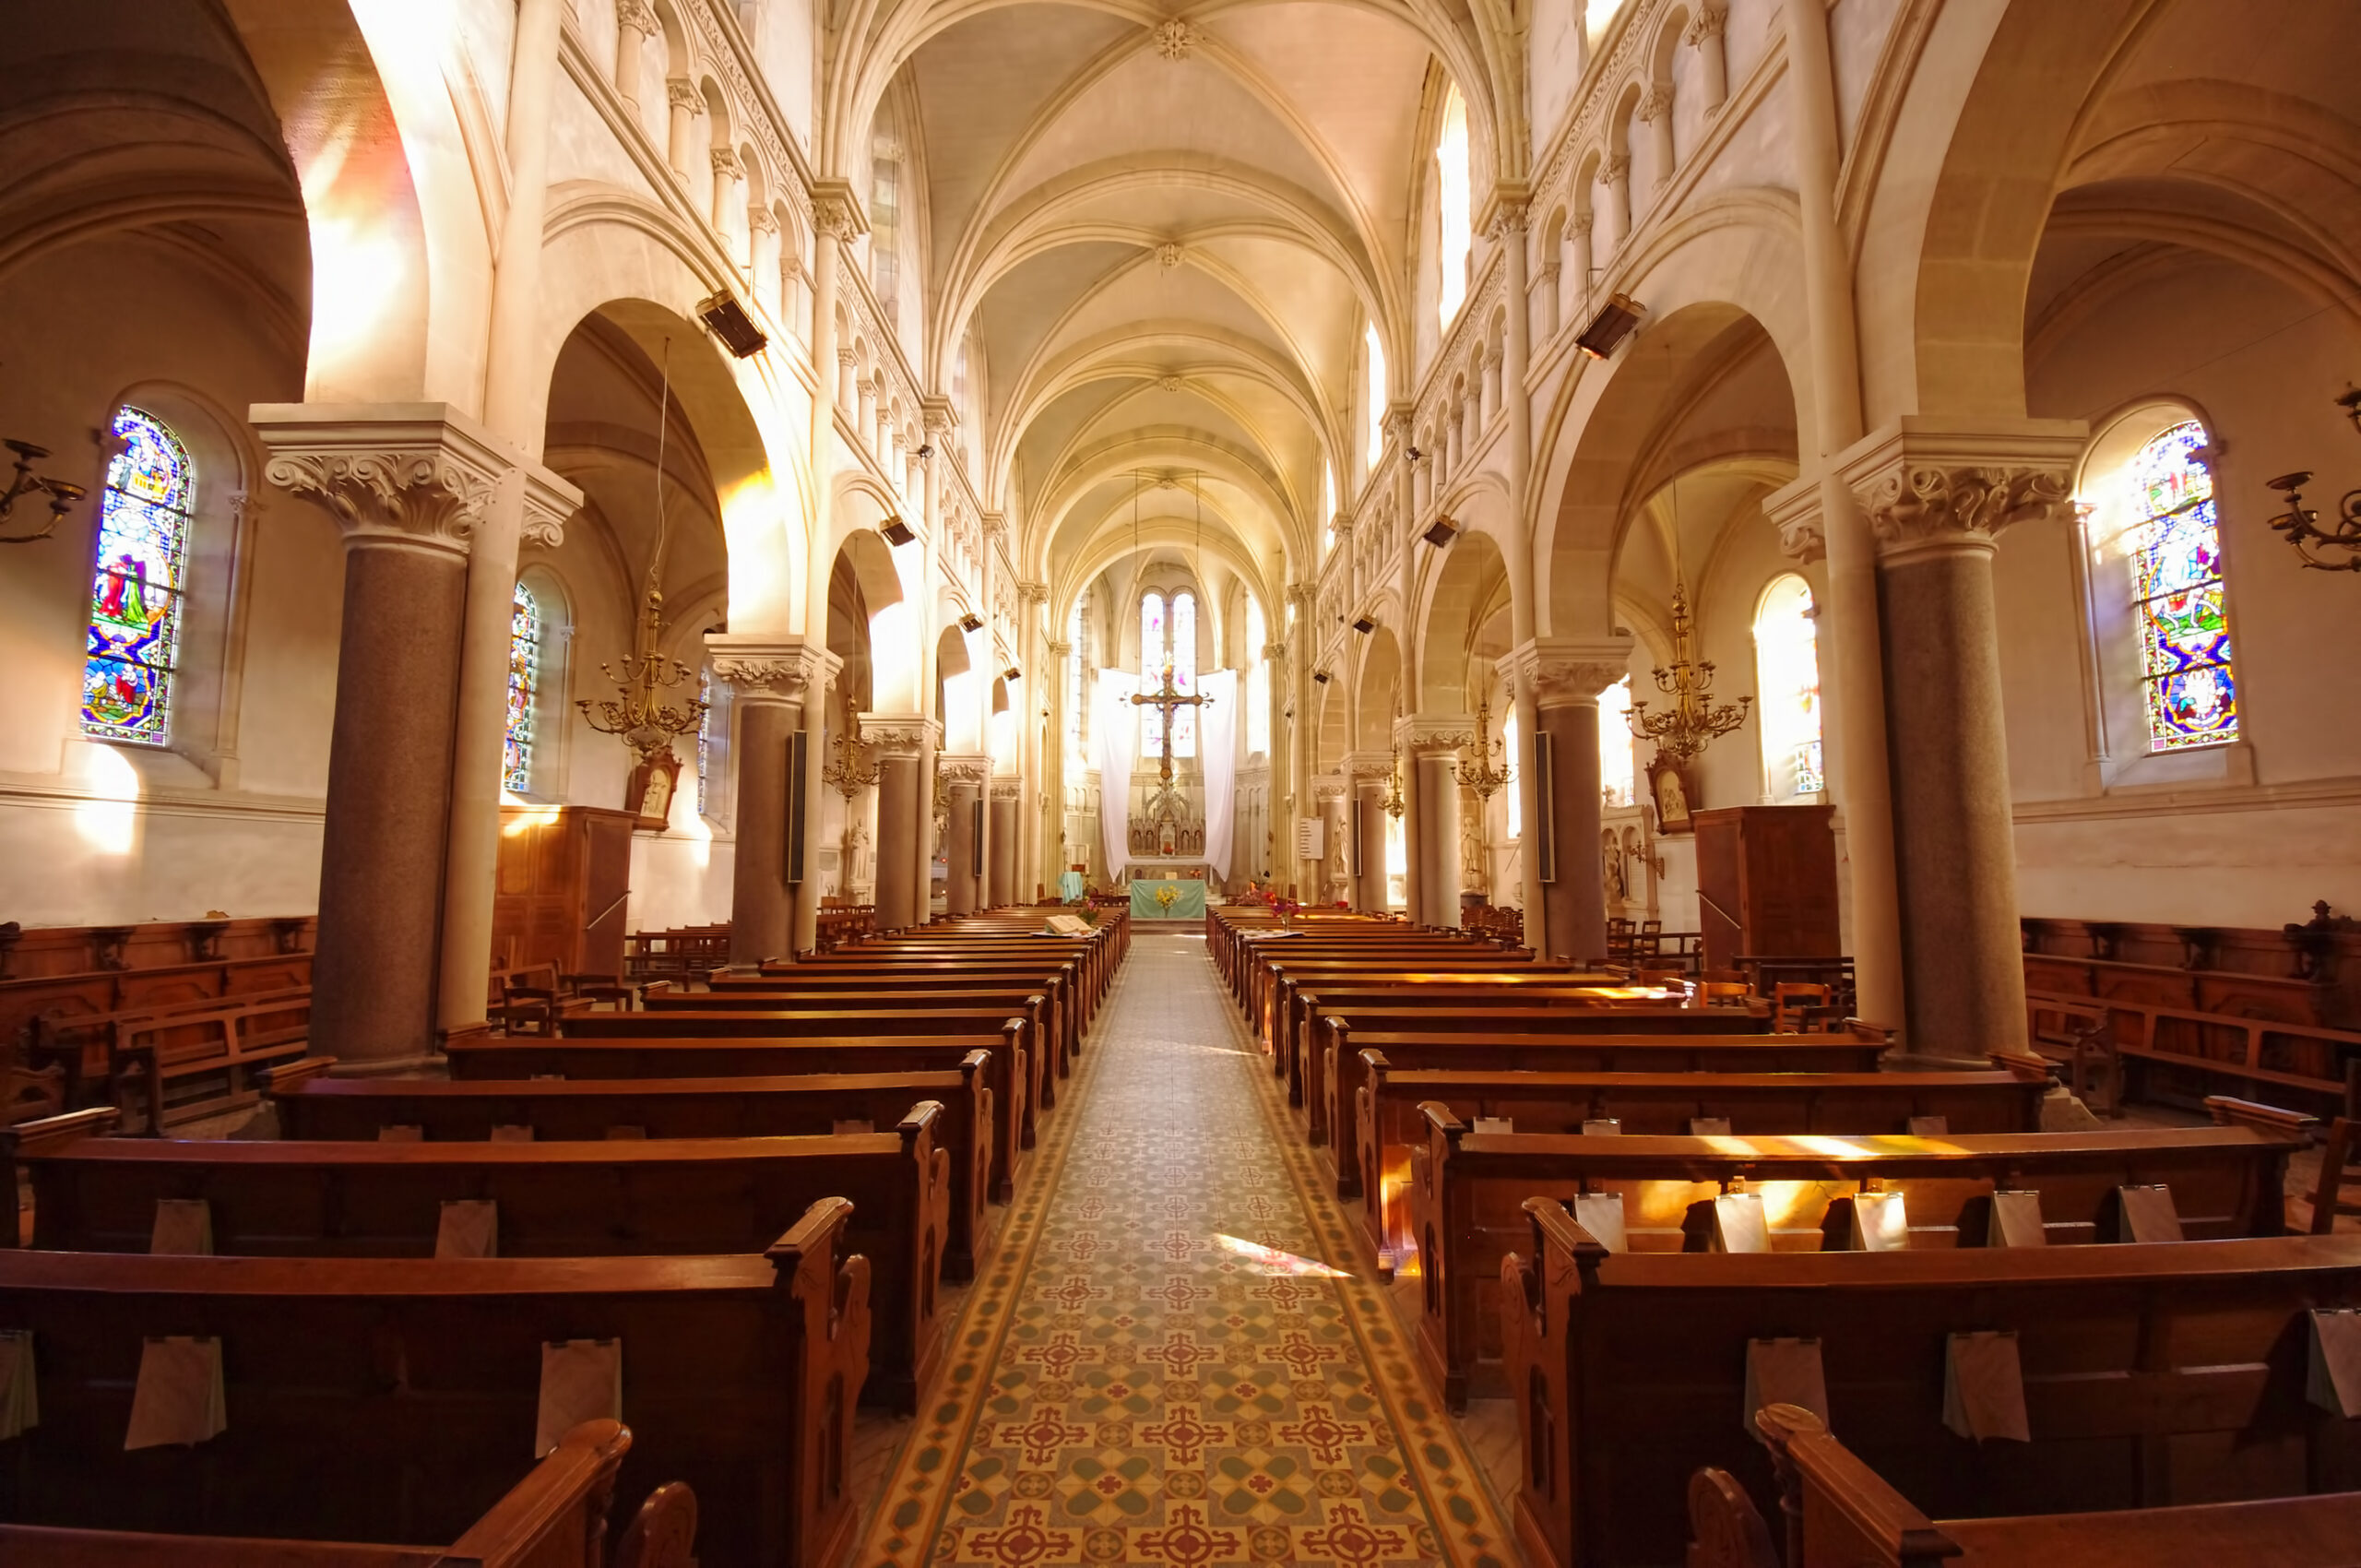 Inside view of a large, empty Church, taken from the back of the main room area, looking towards the front.